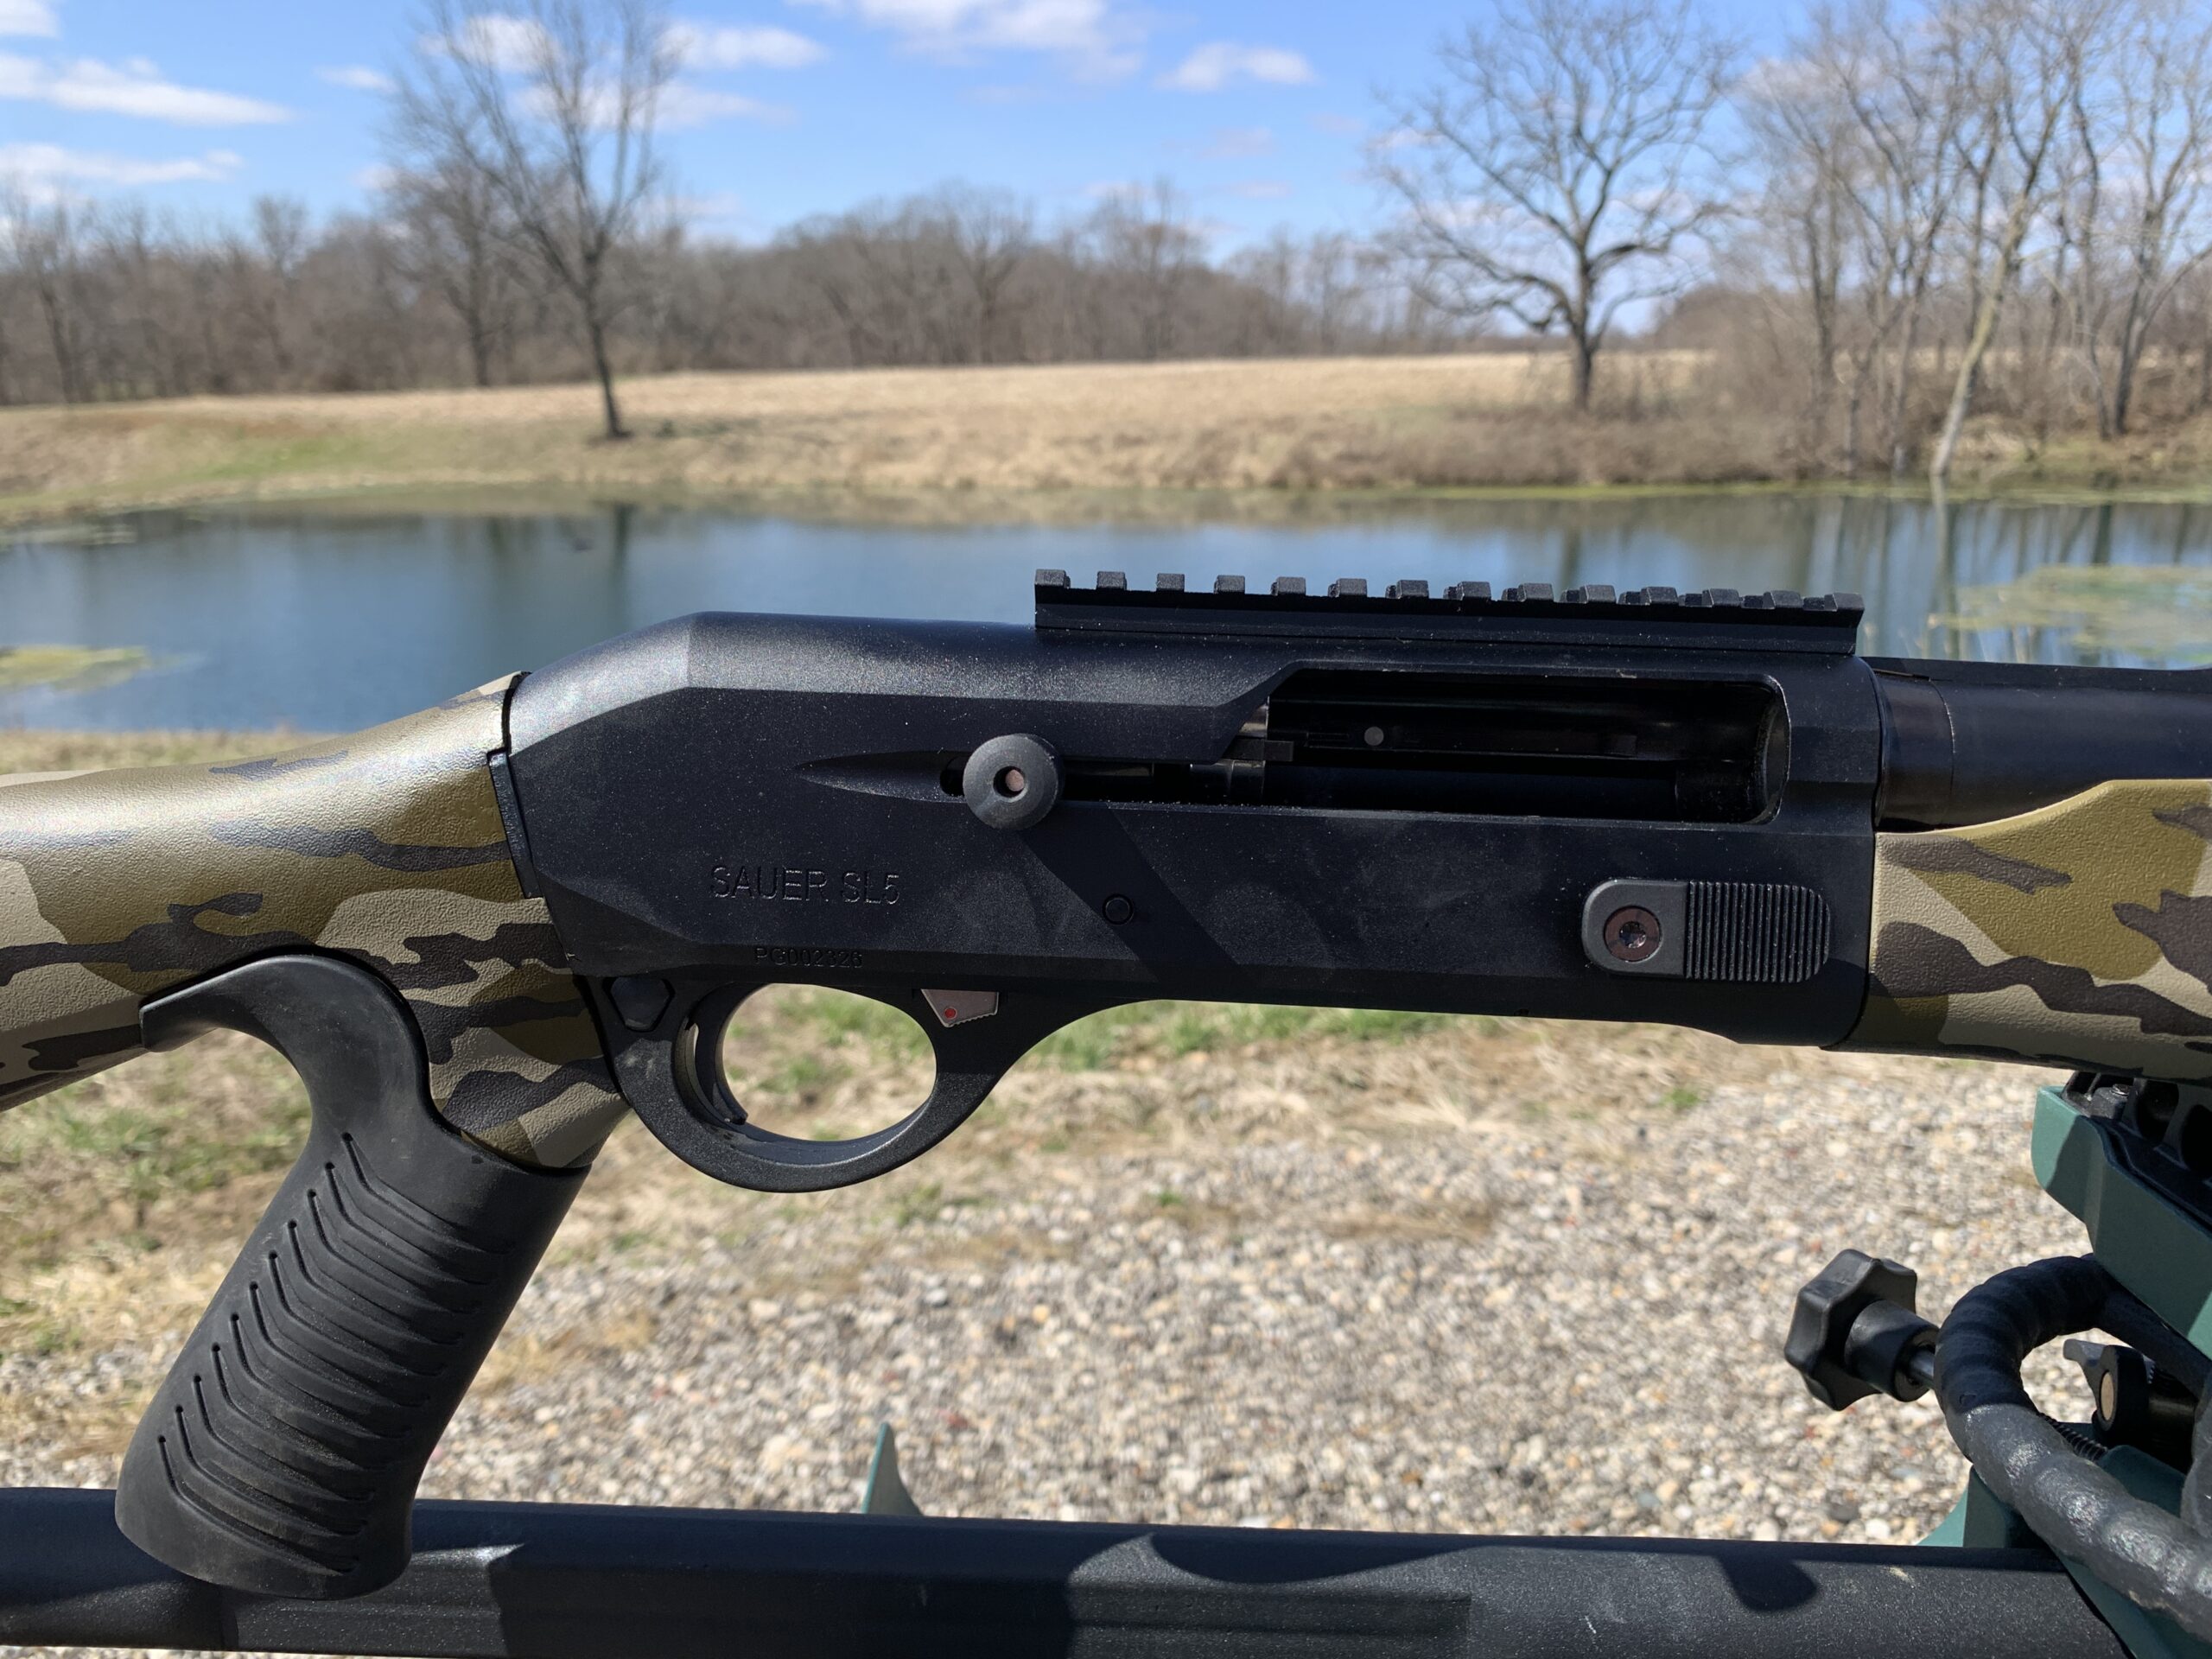 Oversized controls make the Sauer easy to operate.